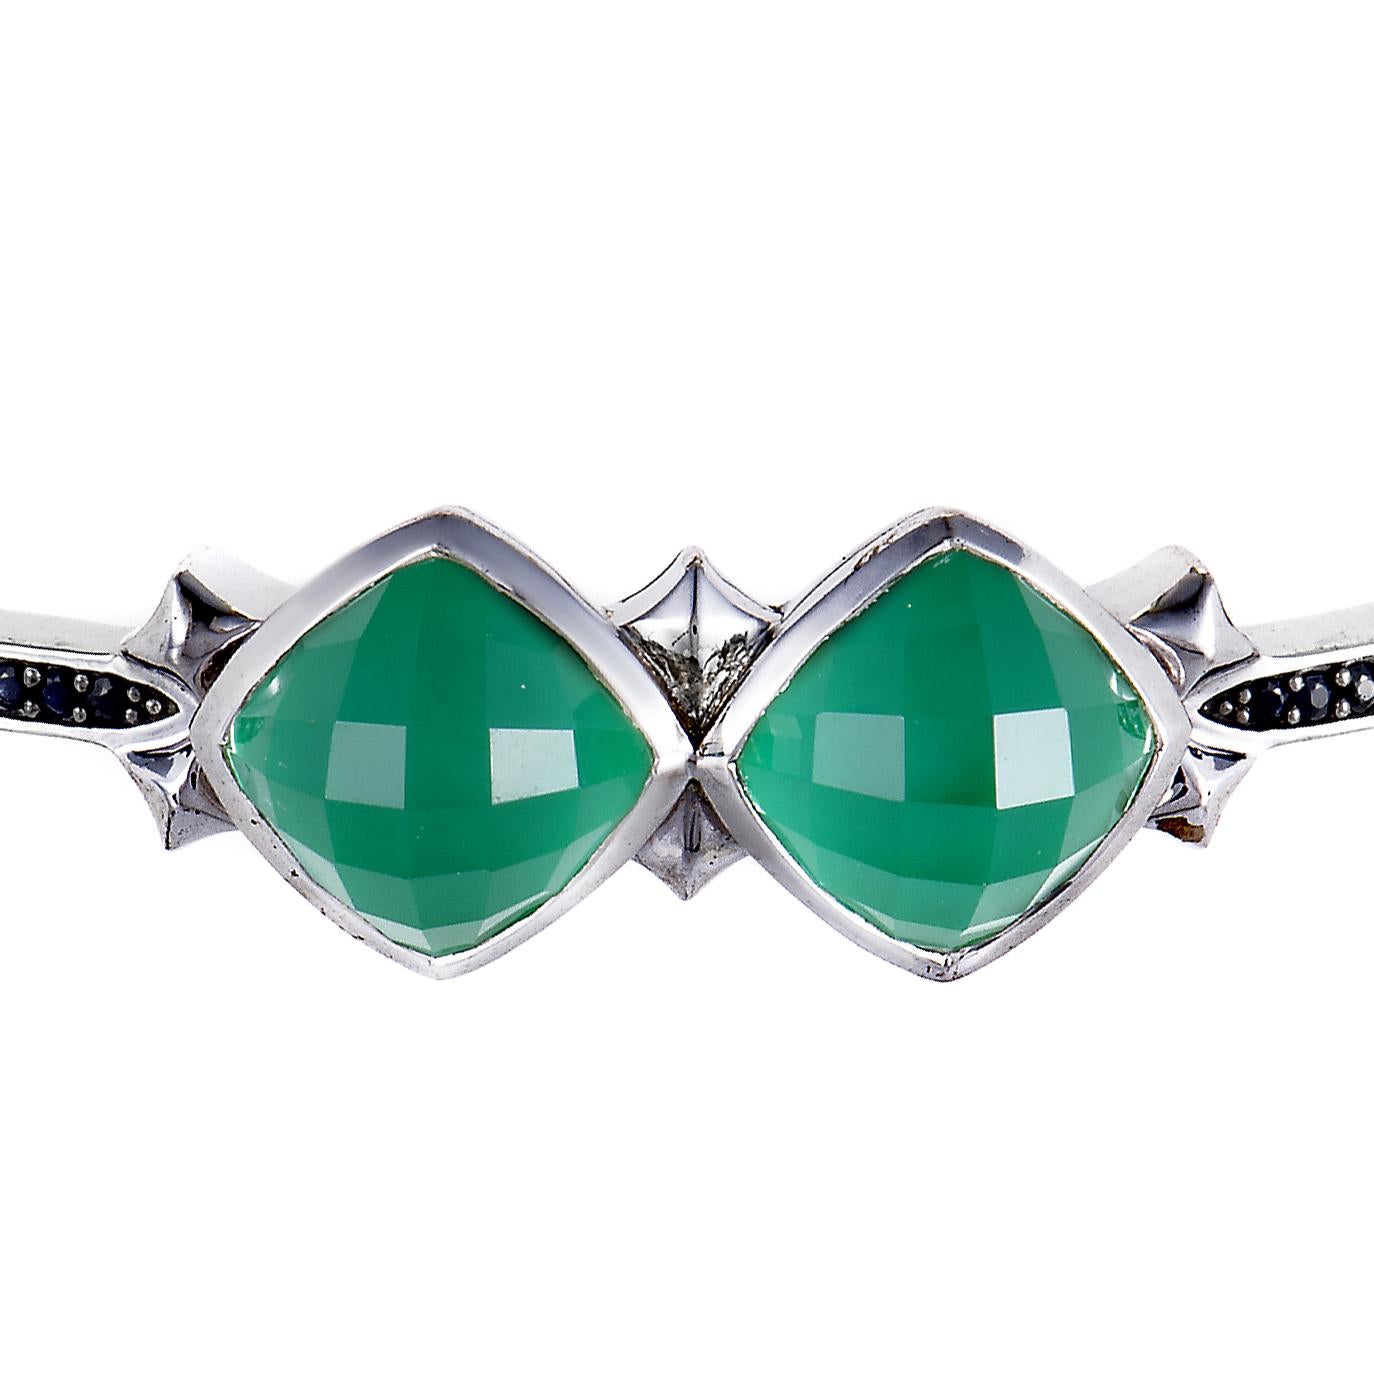 Expertly set and neatly arranged to lead the eye up to the fascinating synthesized chrysoprase and quartz stones, the striking black sapphires weighing in total 0.24ct produce excellent contrast against the splendid white rhodium-plated silver in